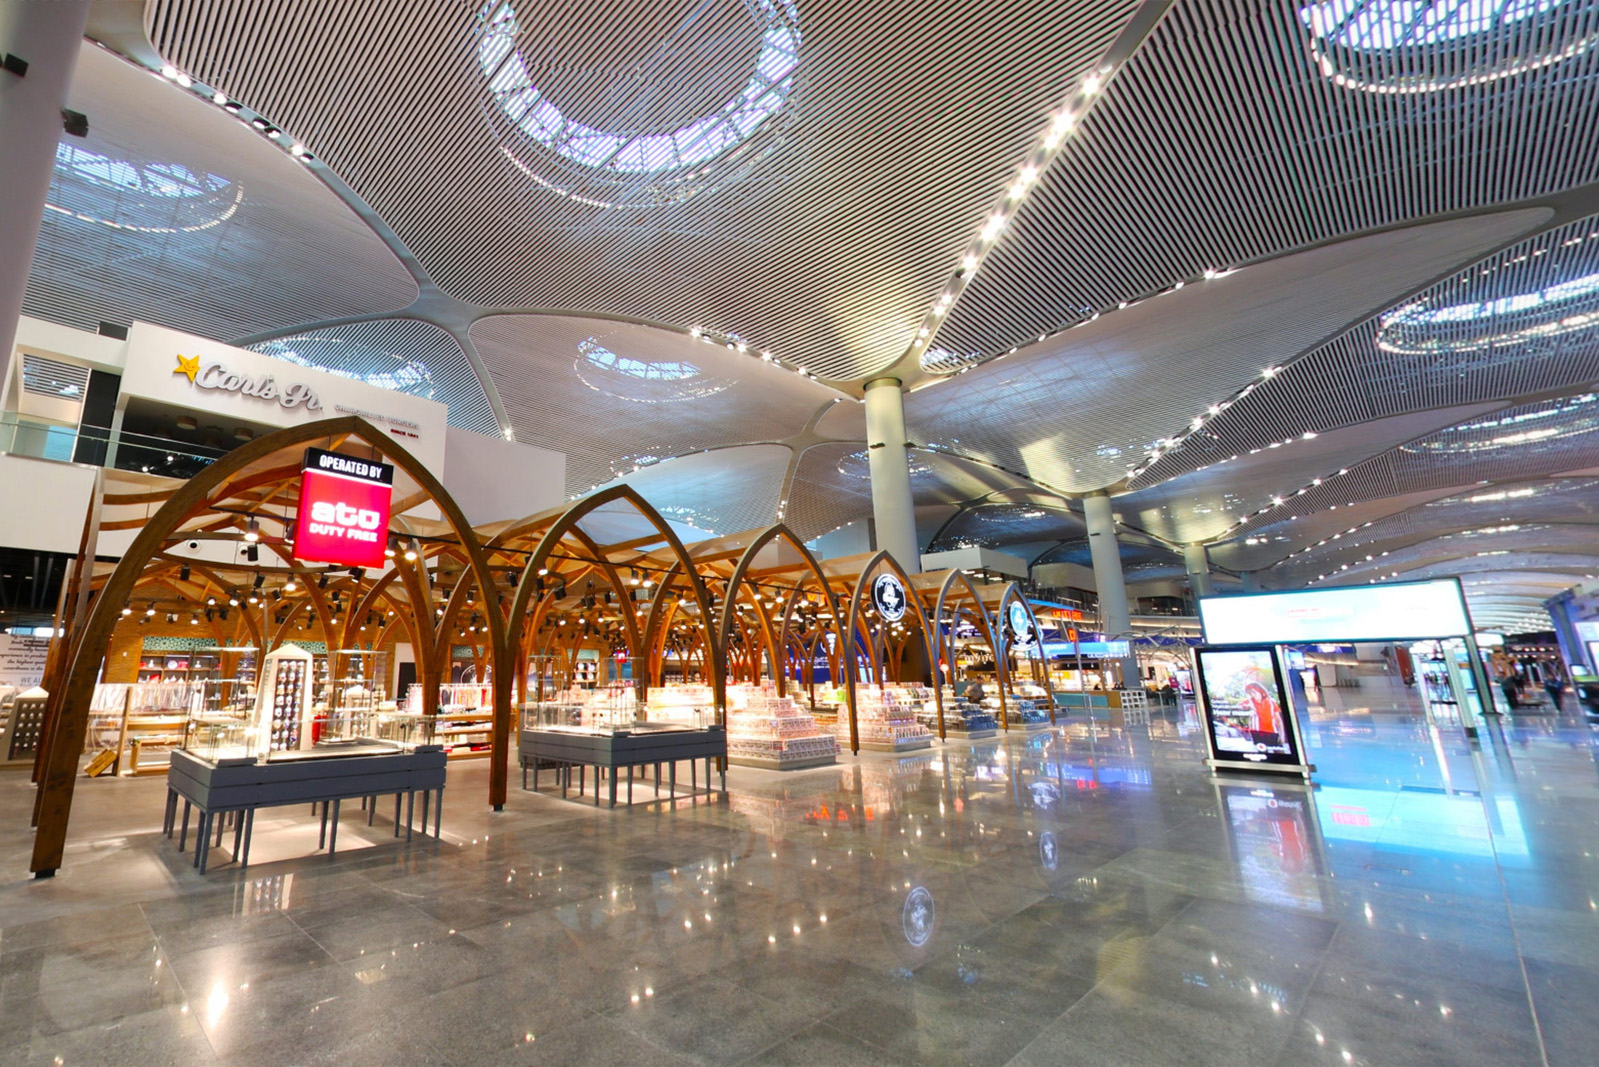 ISTANBUL AIRPORT